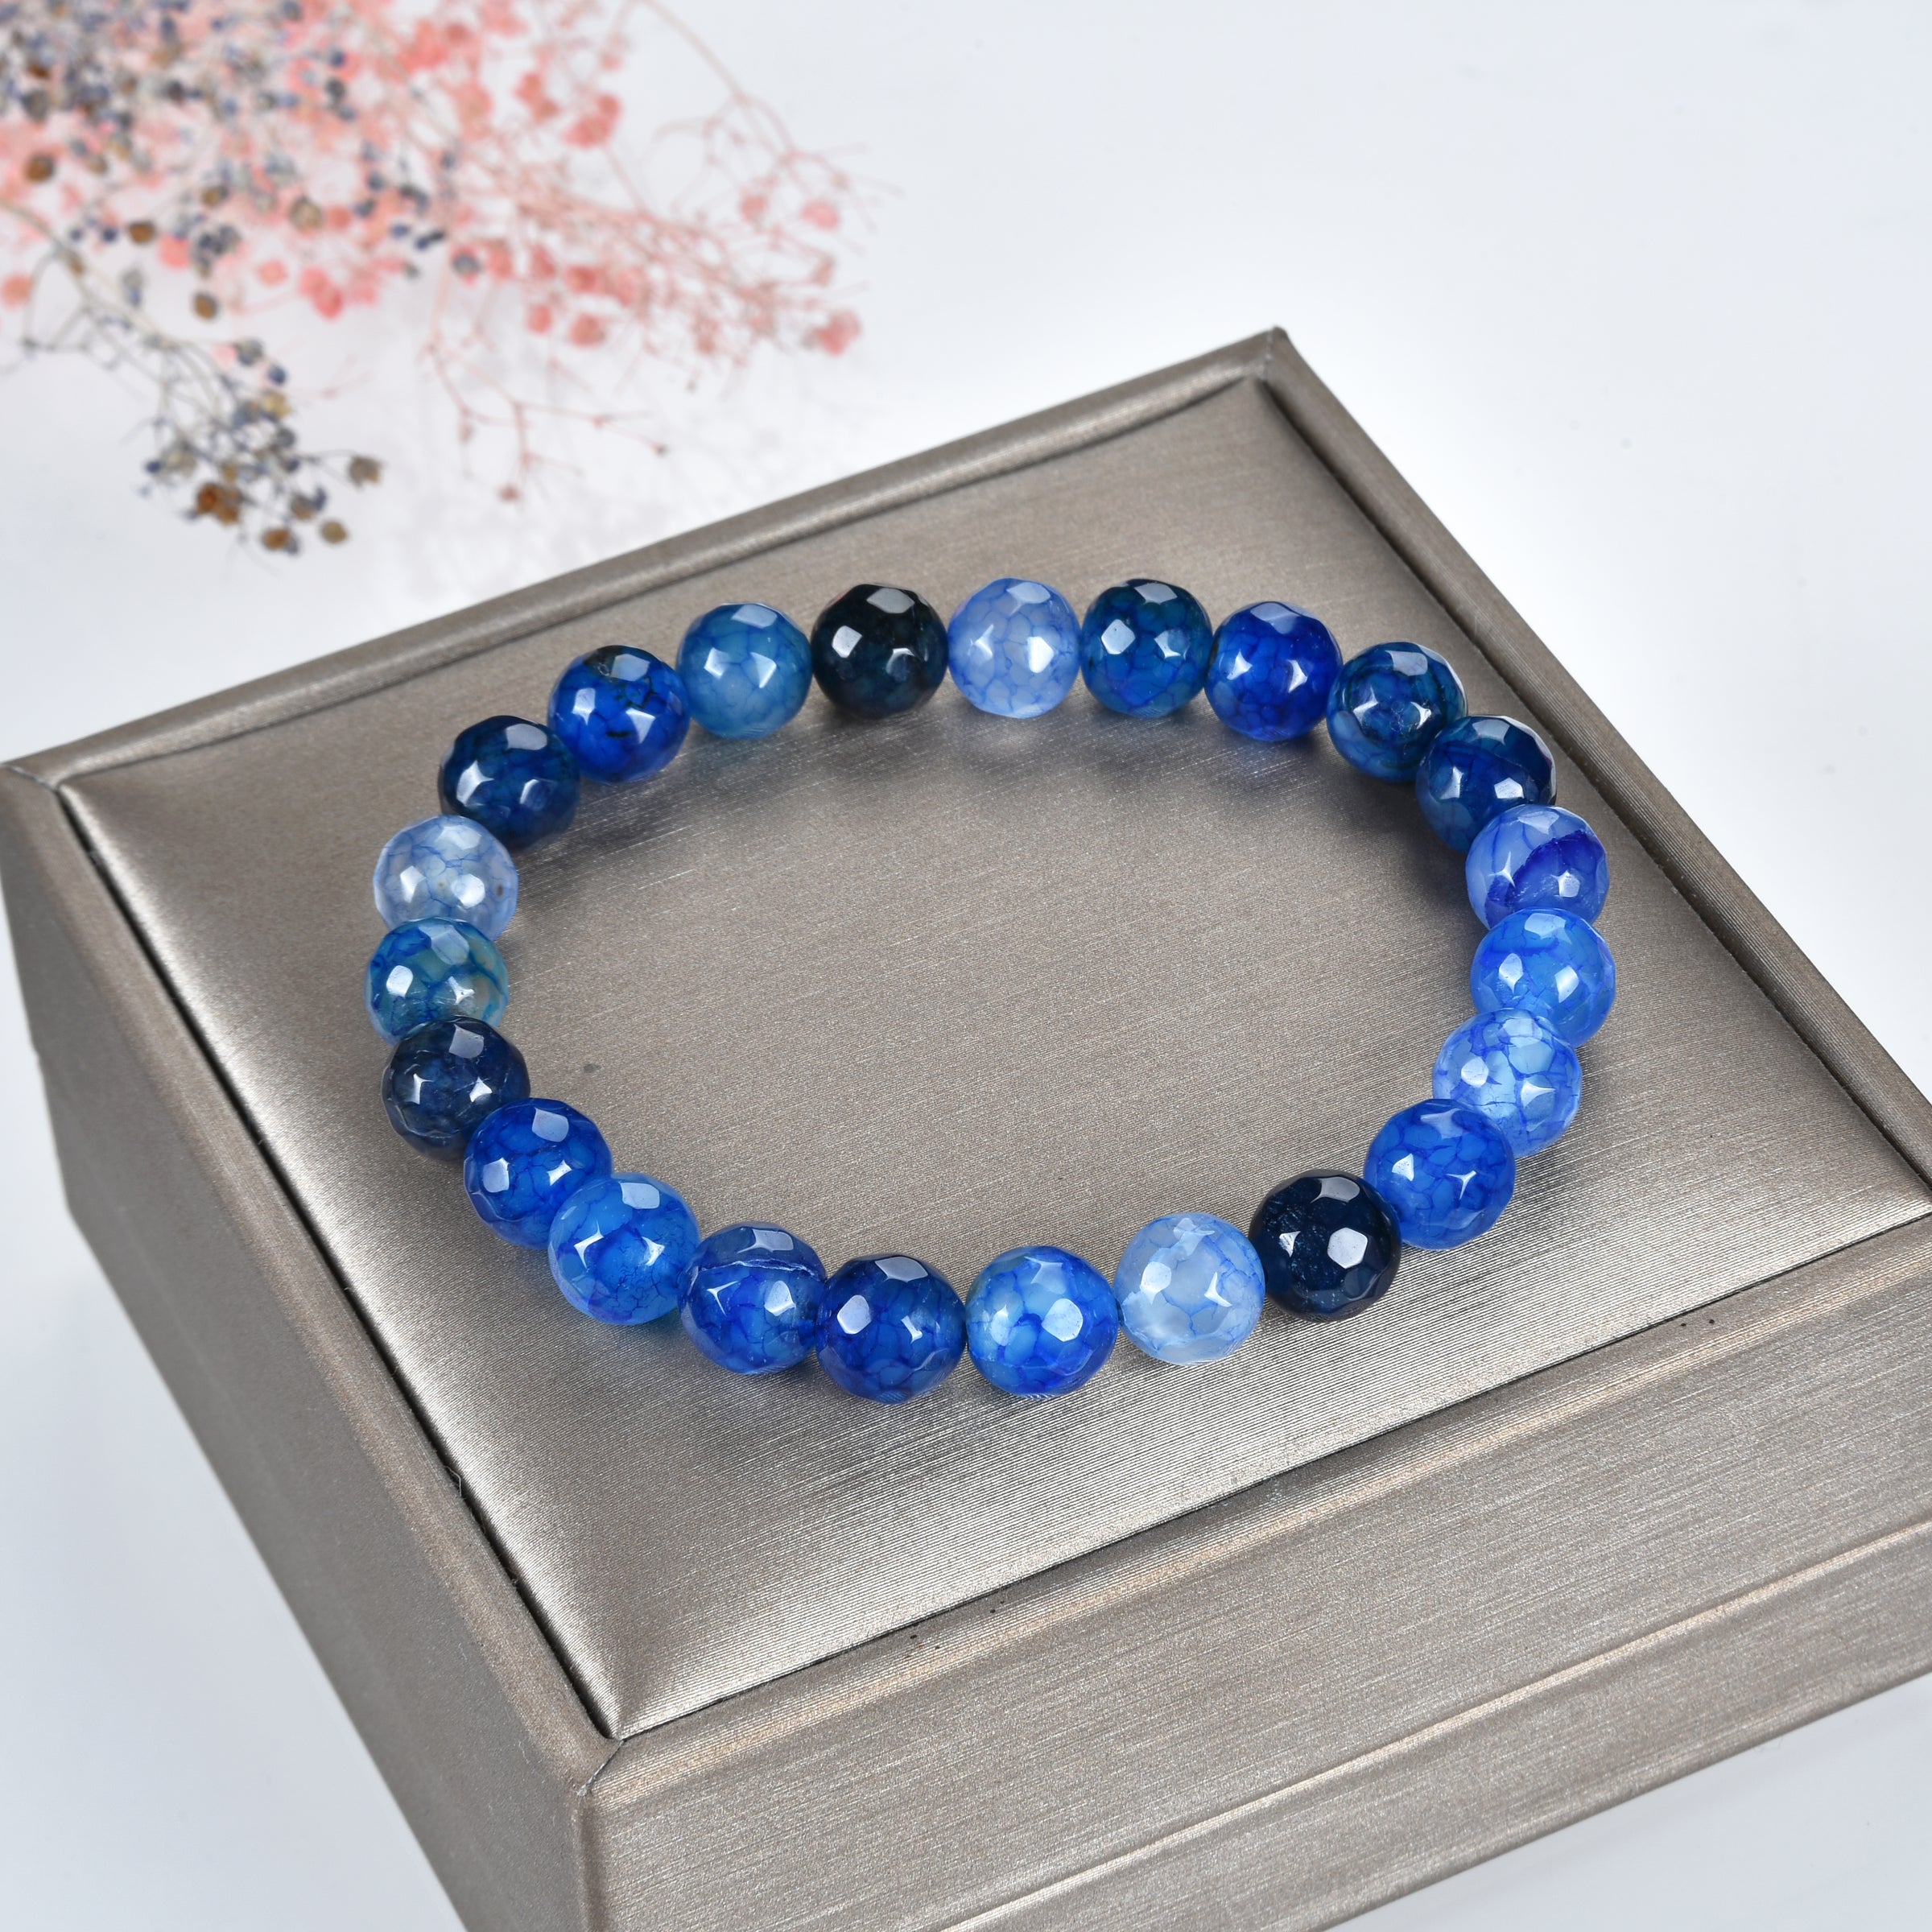 Stretch Bracelet | 8mm Beads (Blue Fire Faceted Agate)